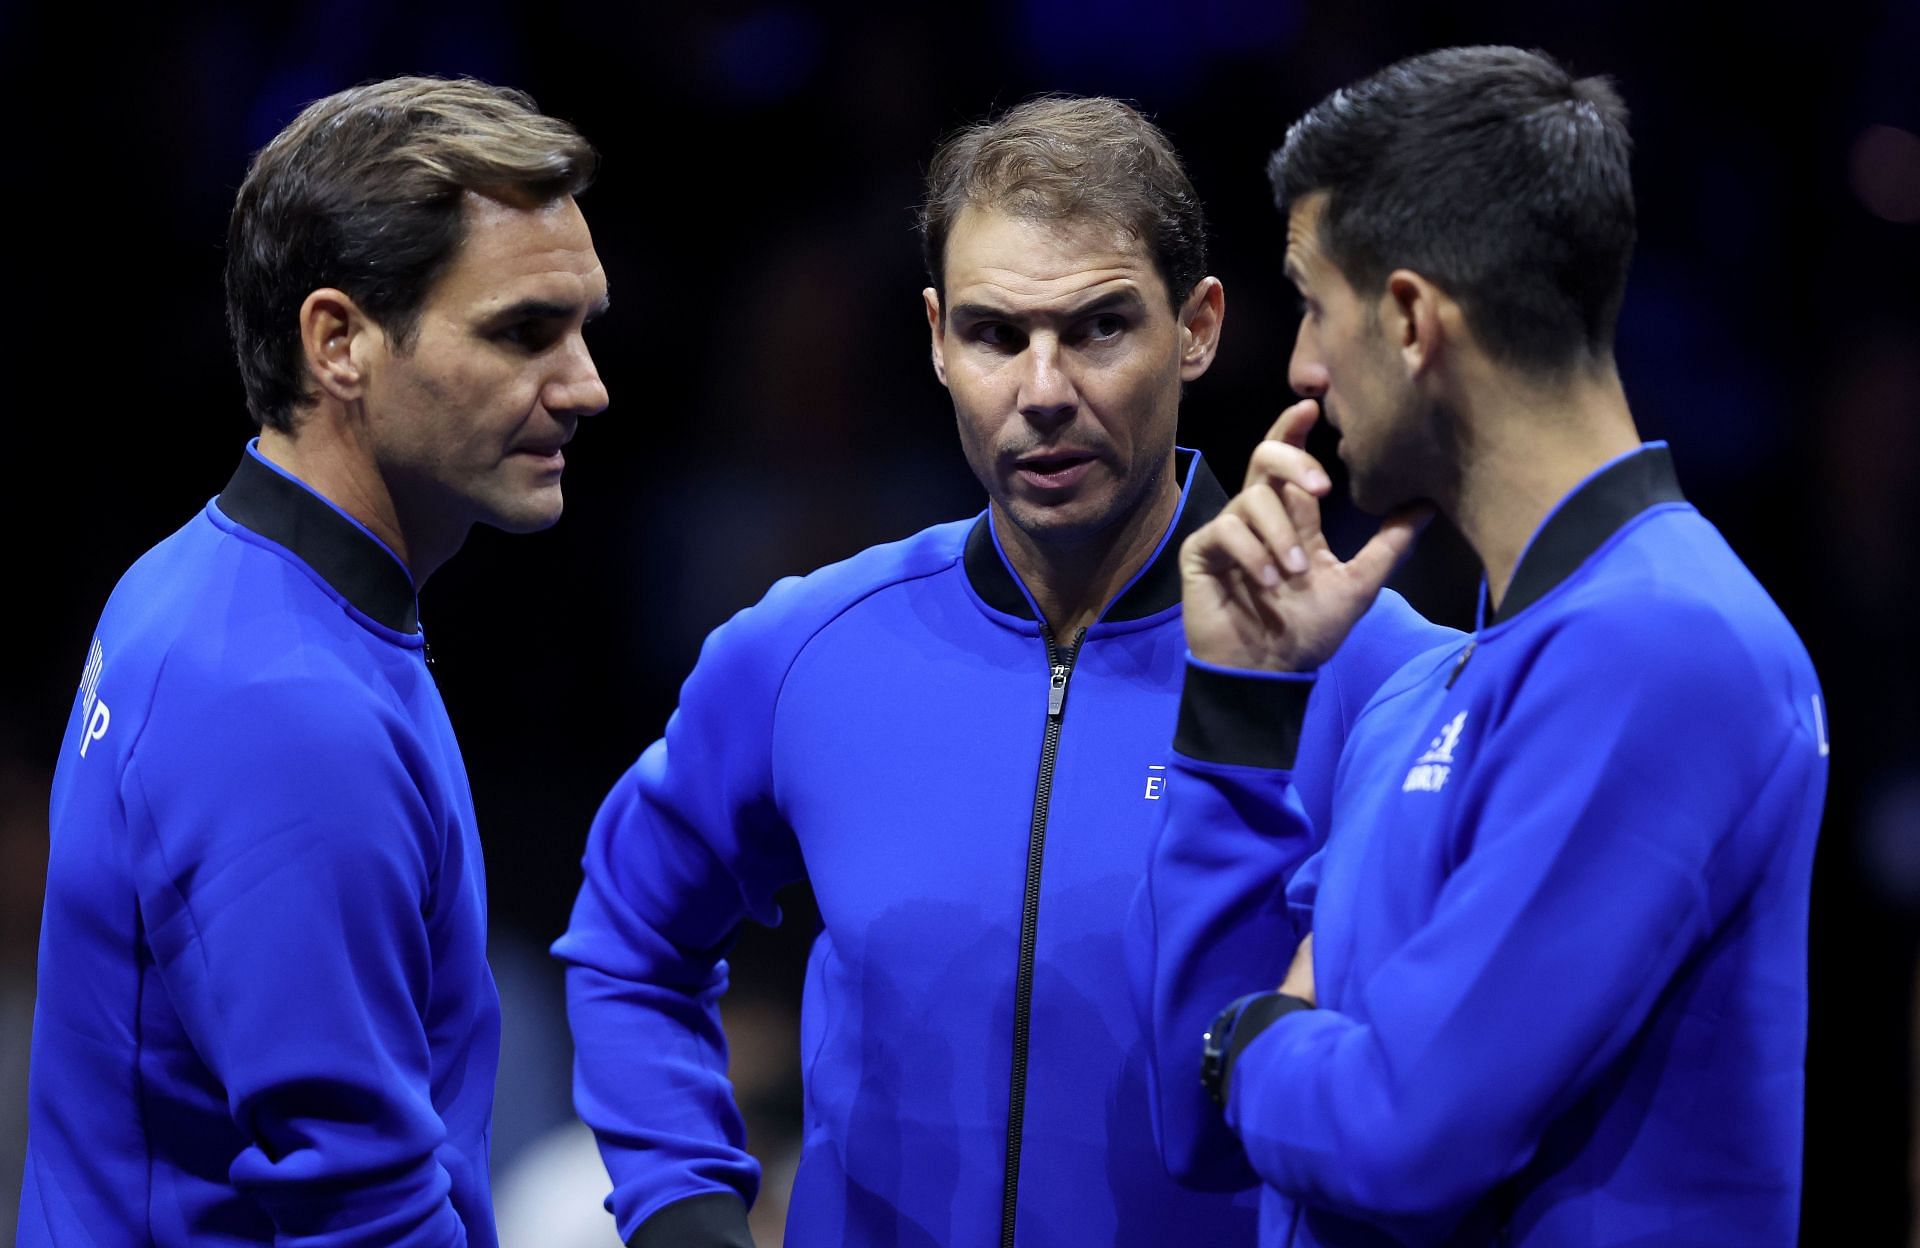 Roger Federer, Rafael Nadal and Novak Djokovic in discussion at the 2022 Laver Cup.